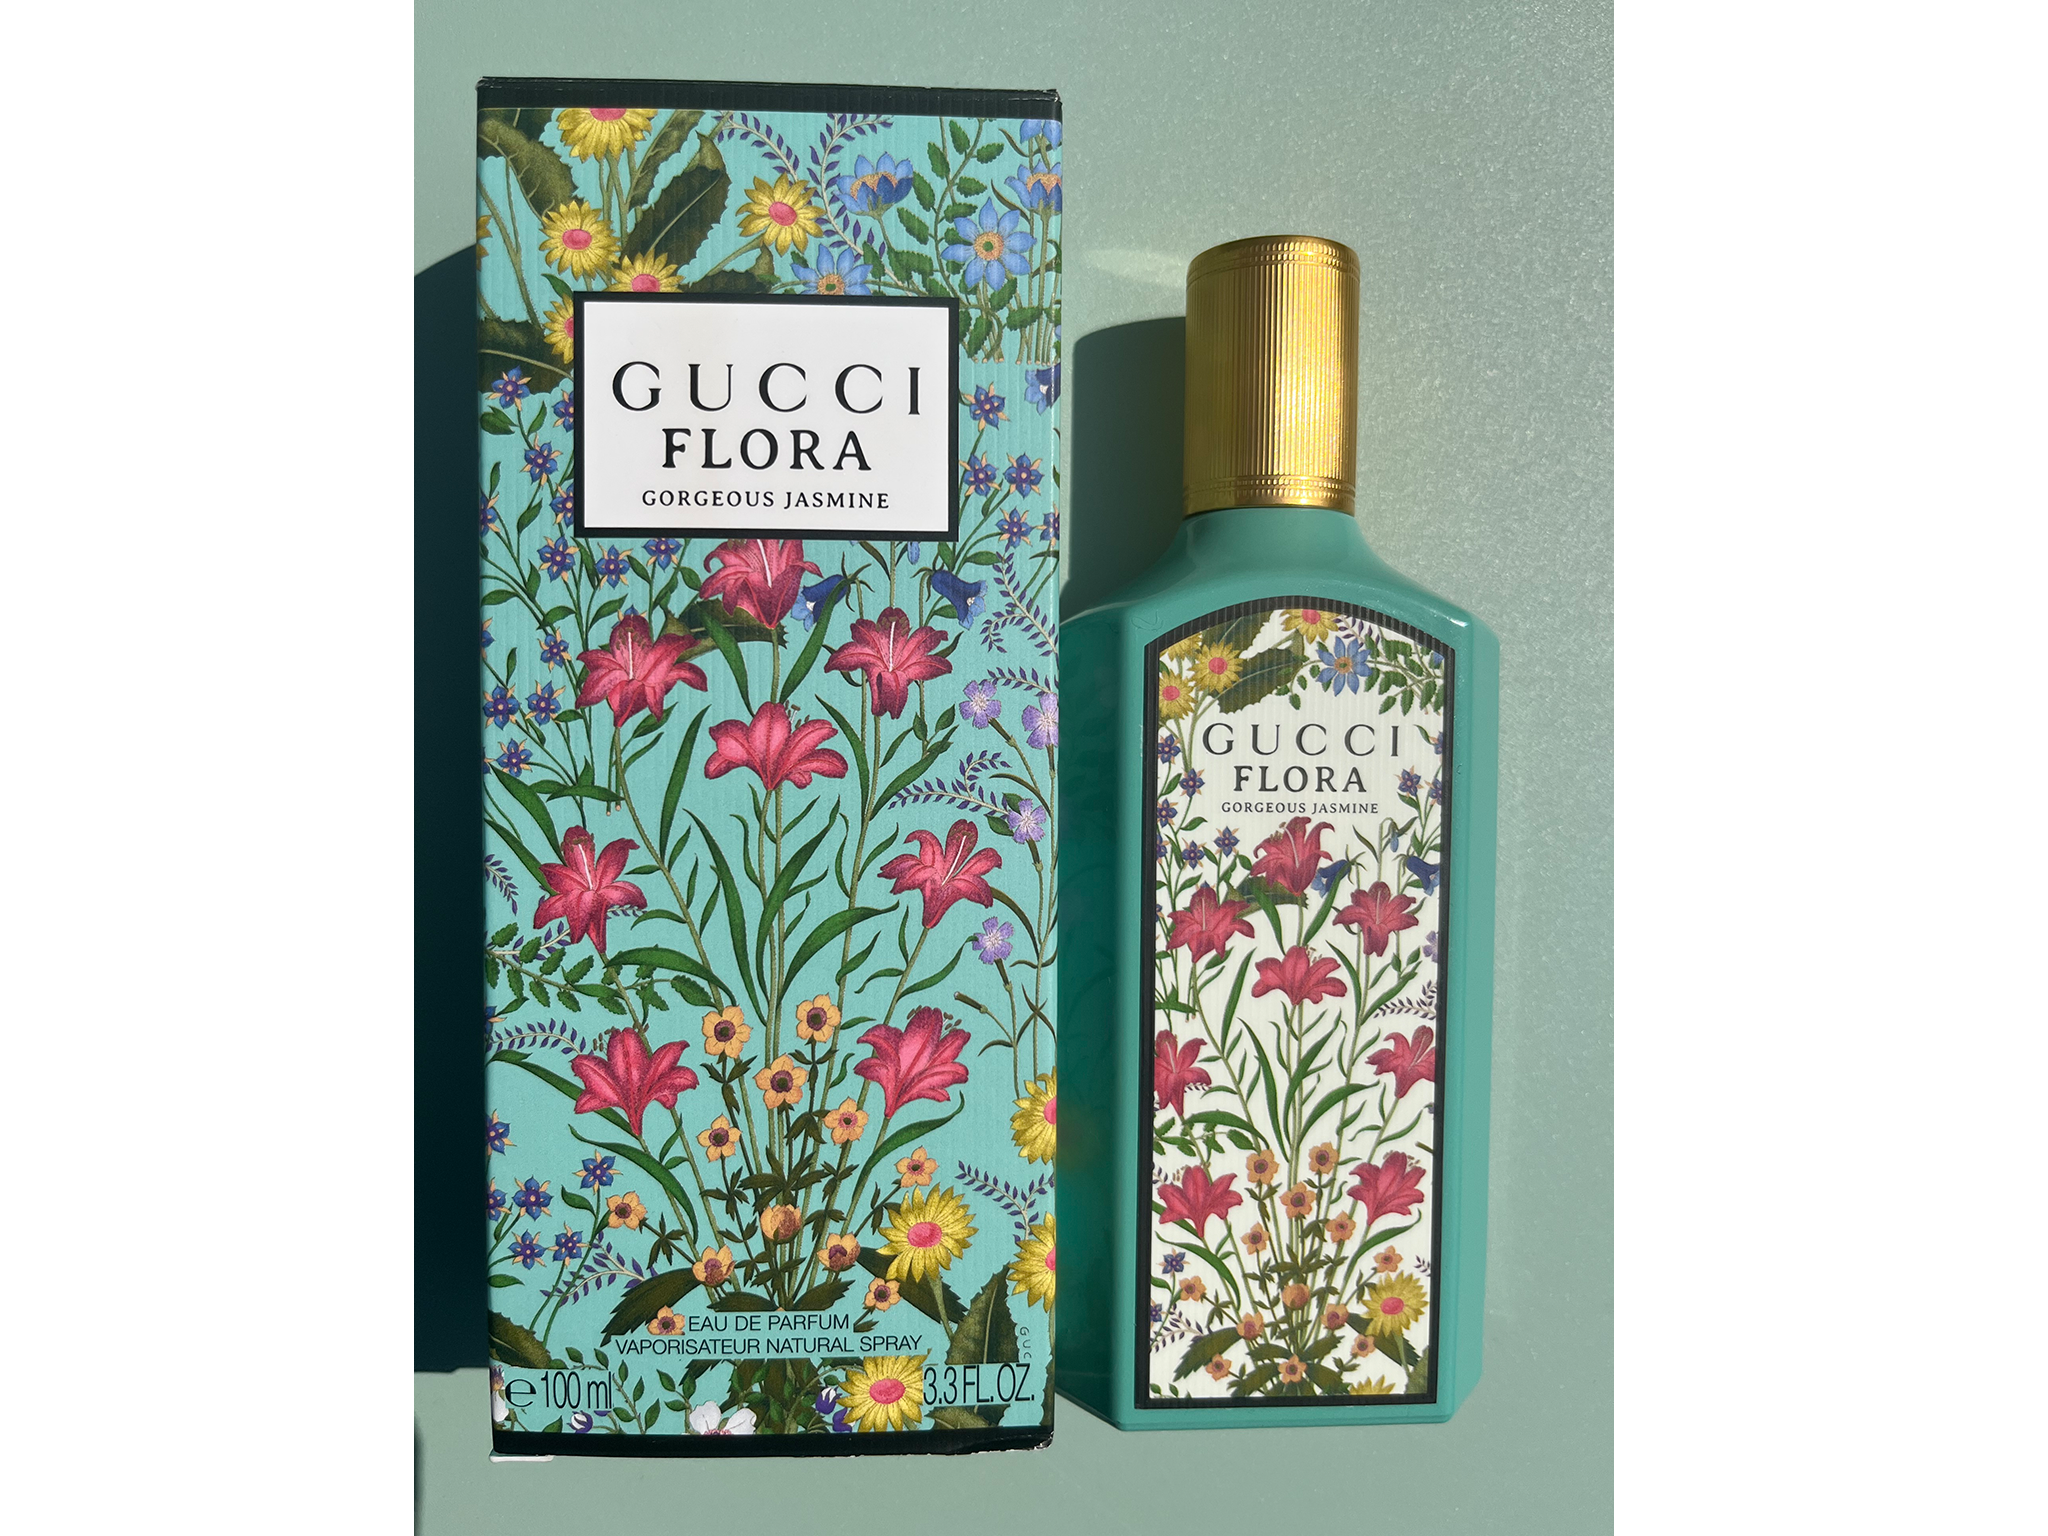 Gucci flora gorgeous jasmine perfume review: A fresh scent that lingers all  day | The Independent